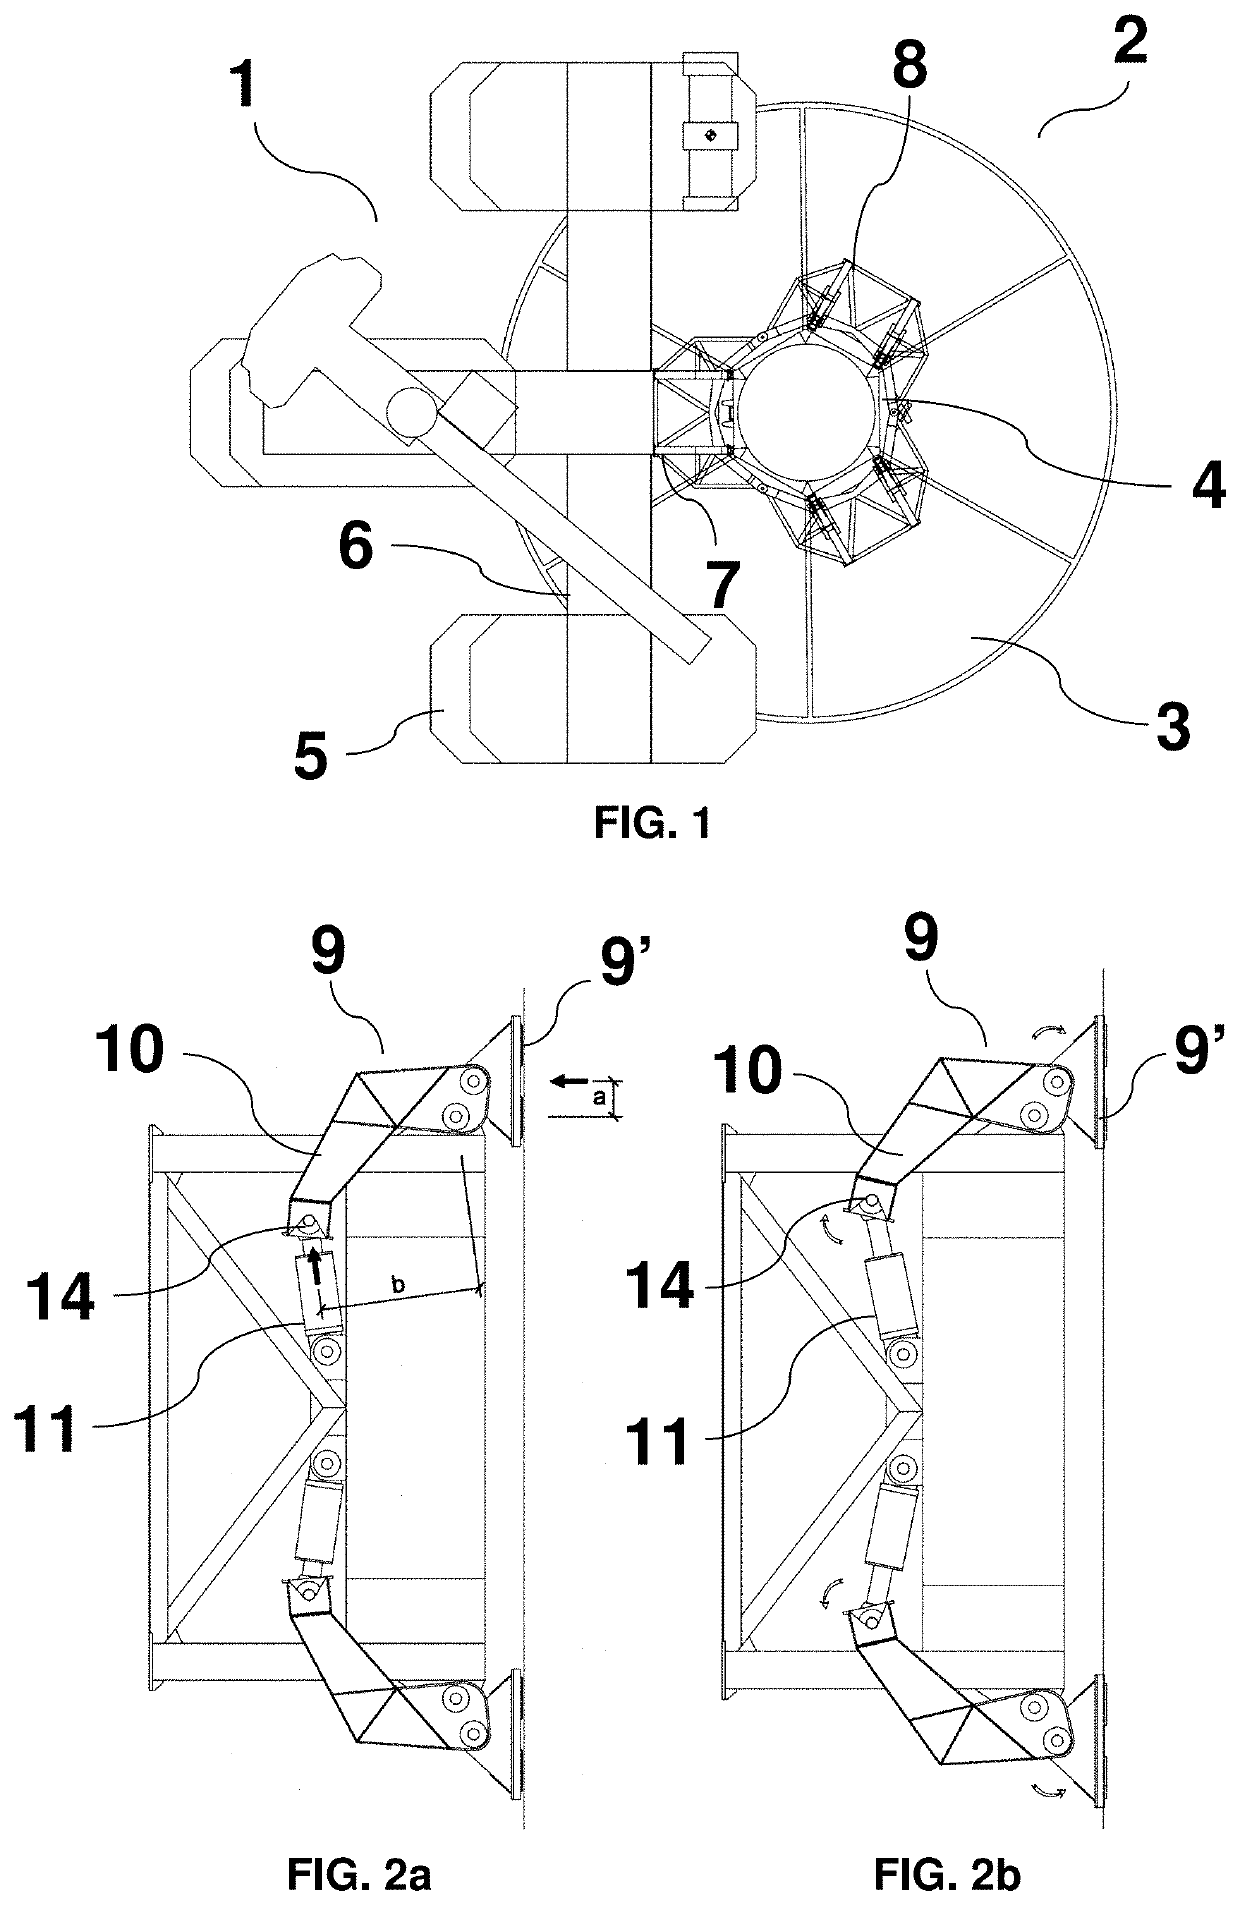 Method for the Maintenance of Wind Turbine Towers by means of Auxiliary Floating Systems